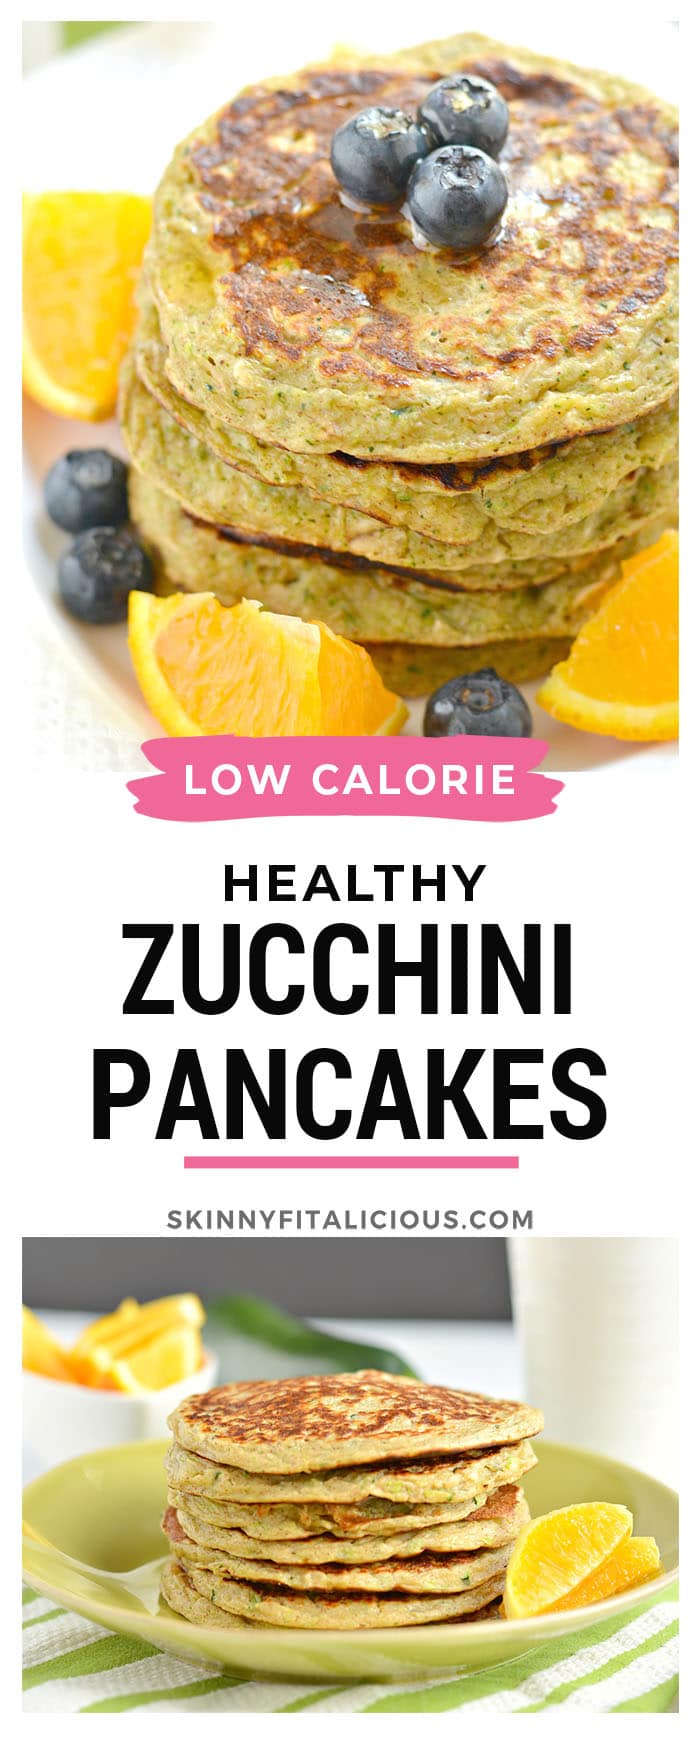 Zucchini Greek Yogurt Pancakes are low calorie, high protein and made flourless with oats. Gluten free breakfast for weight loss with hidden veggies.